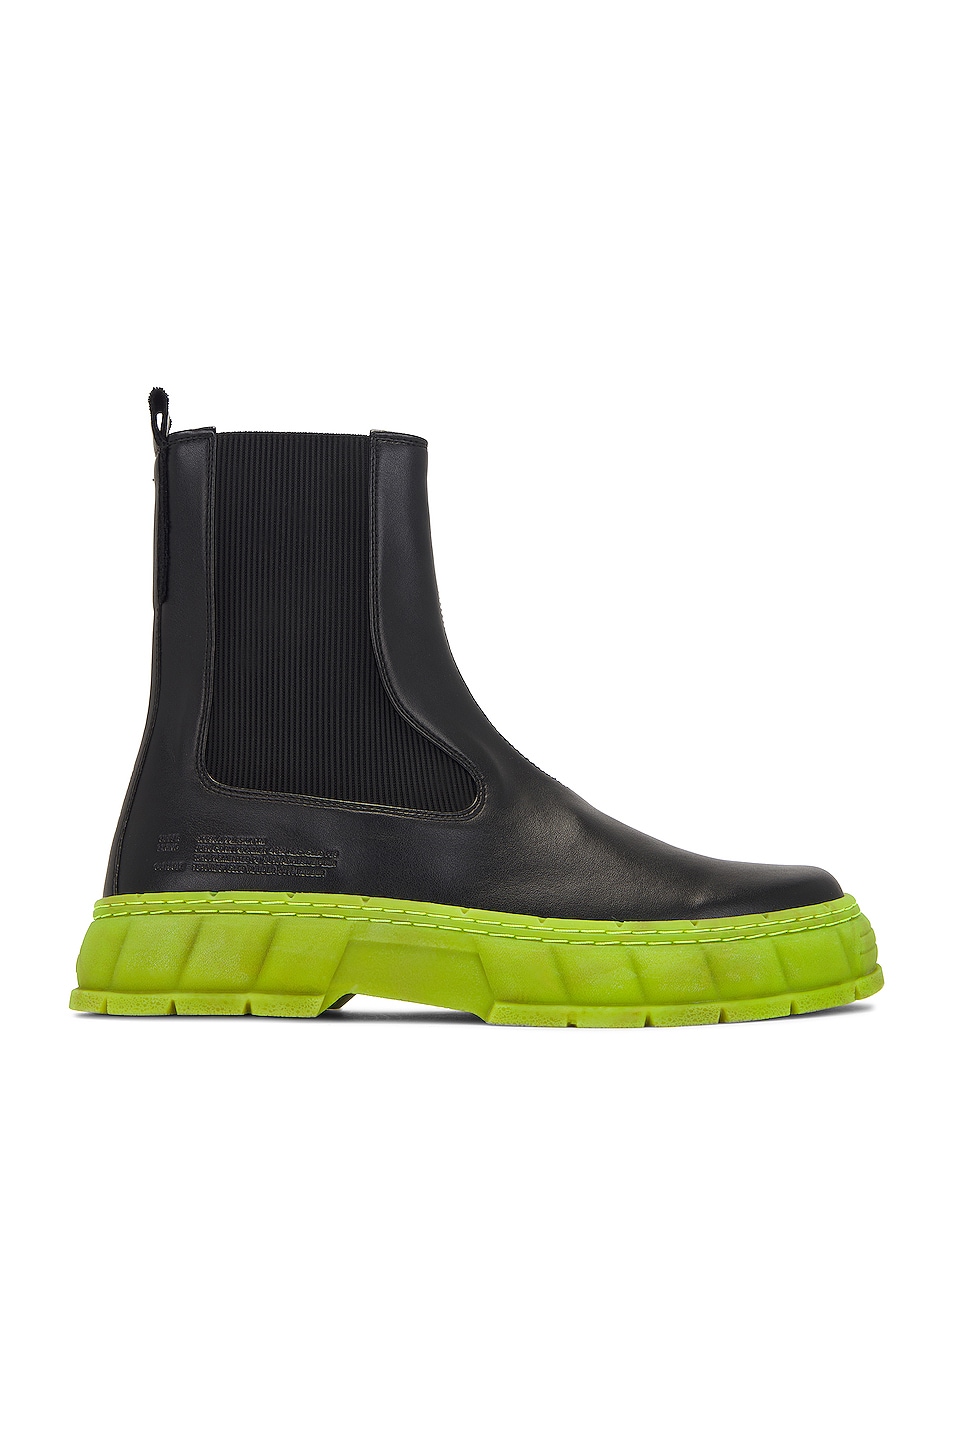 Viron 1997 Boot in Lime | FWRD